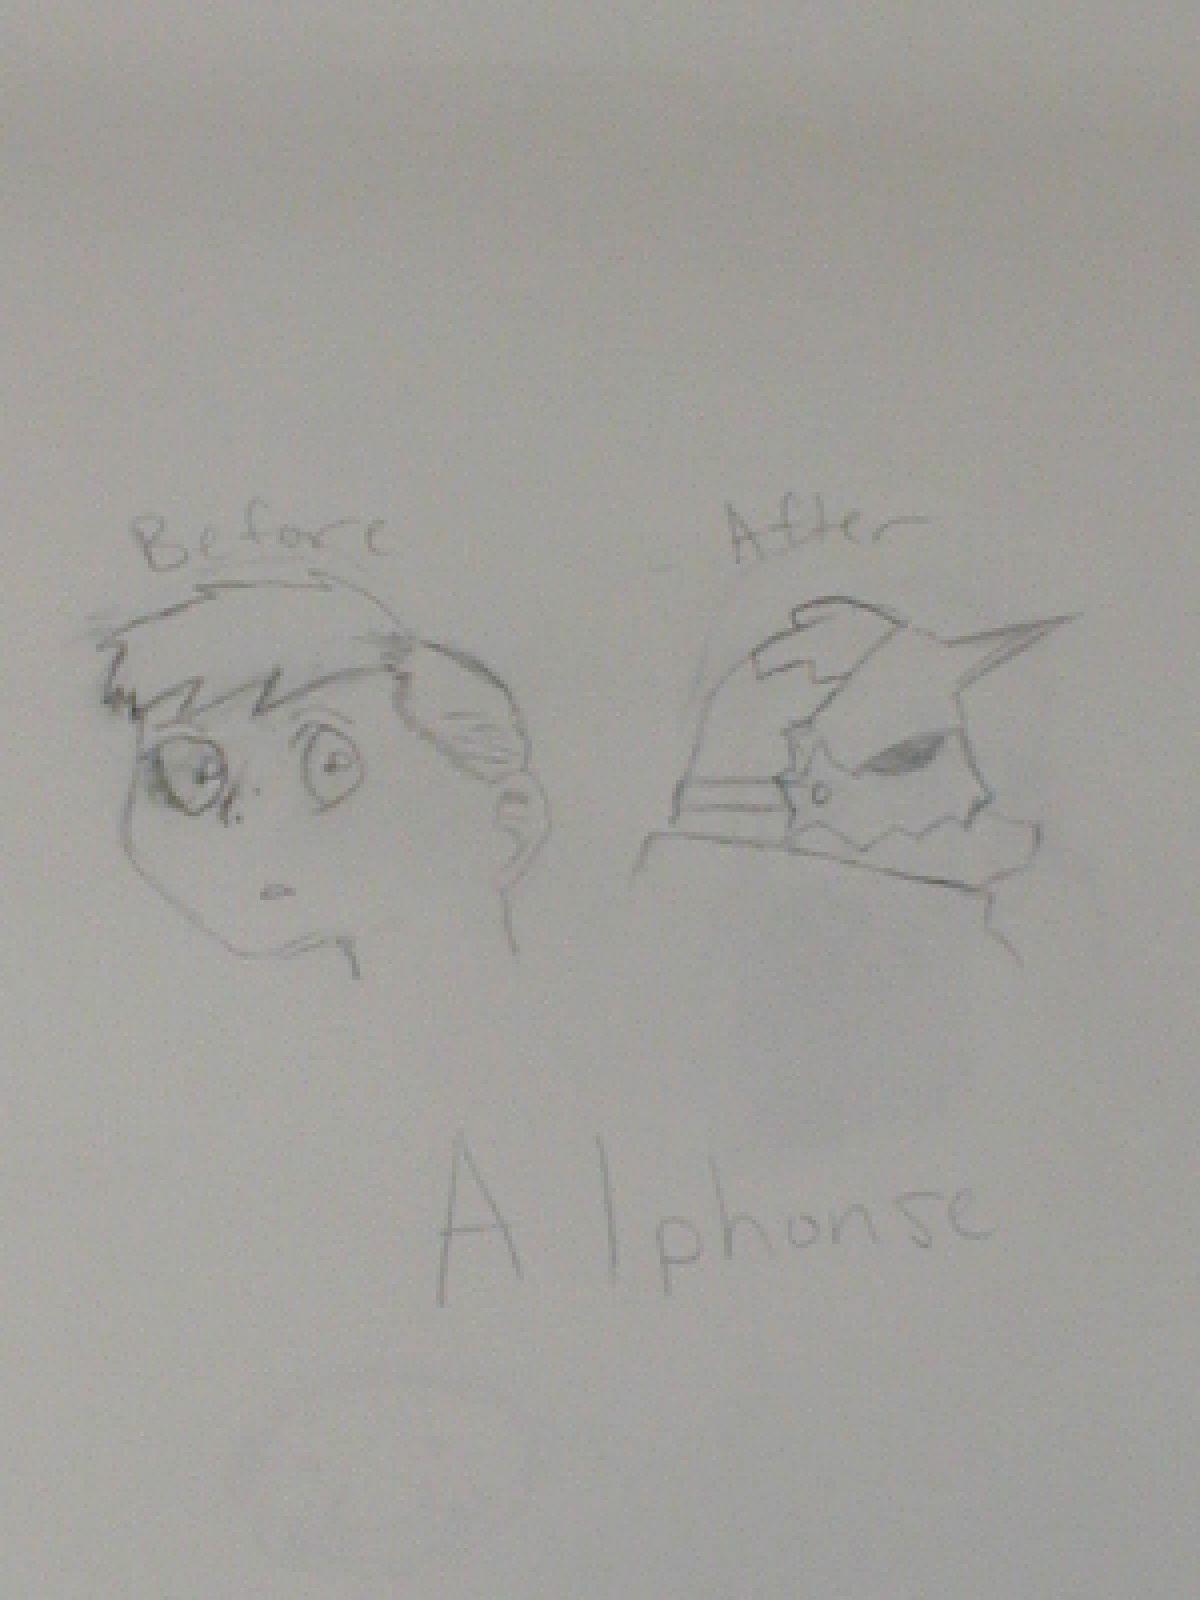 Al before and after by inventor